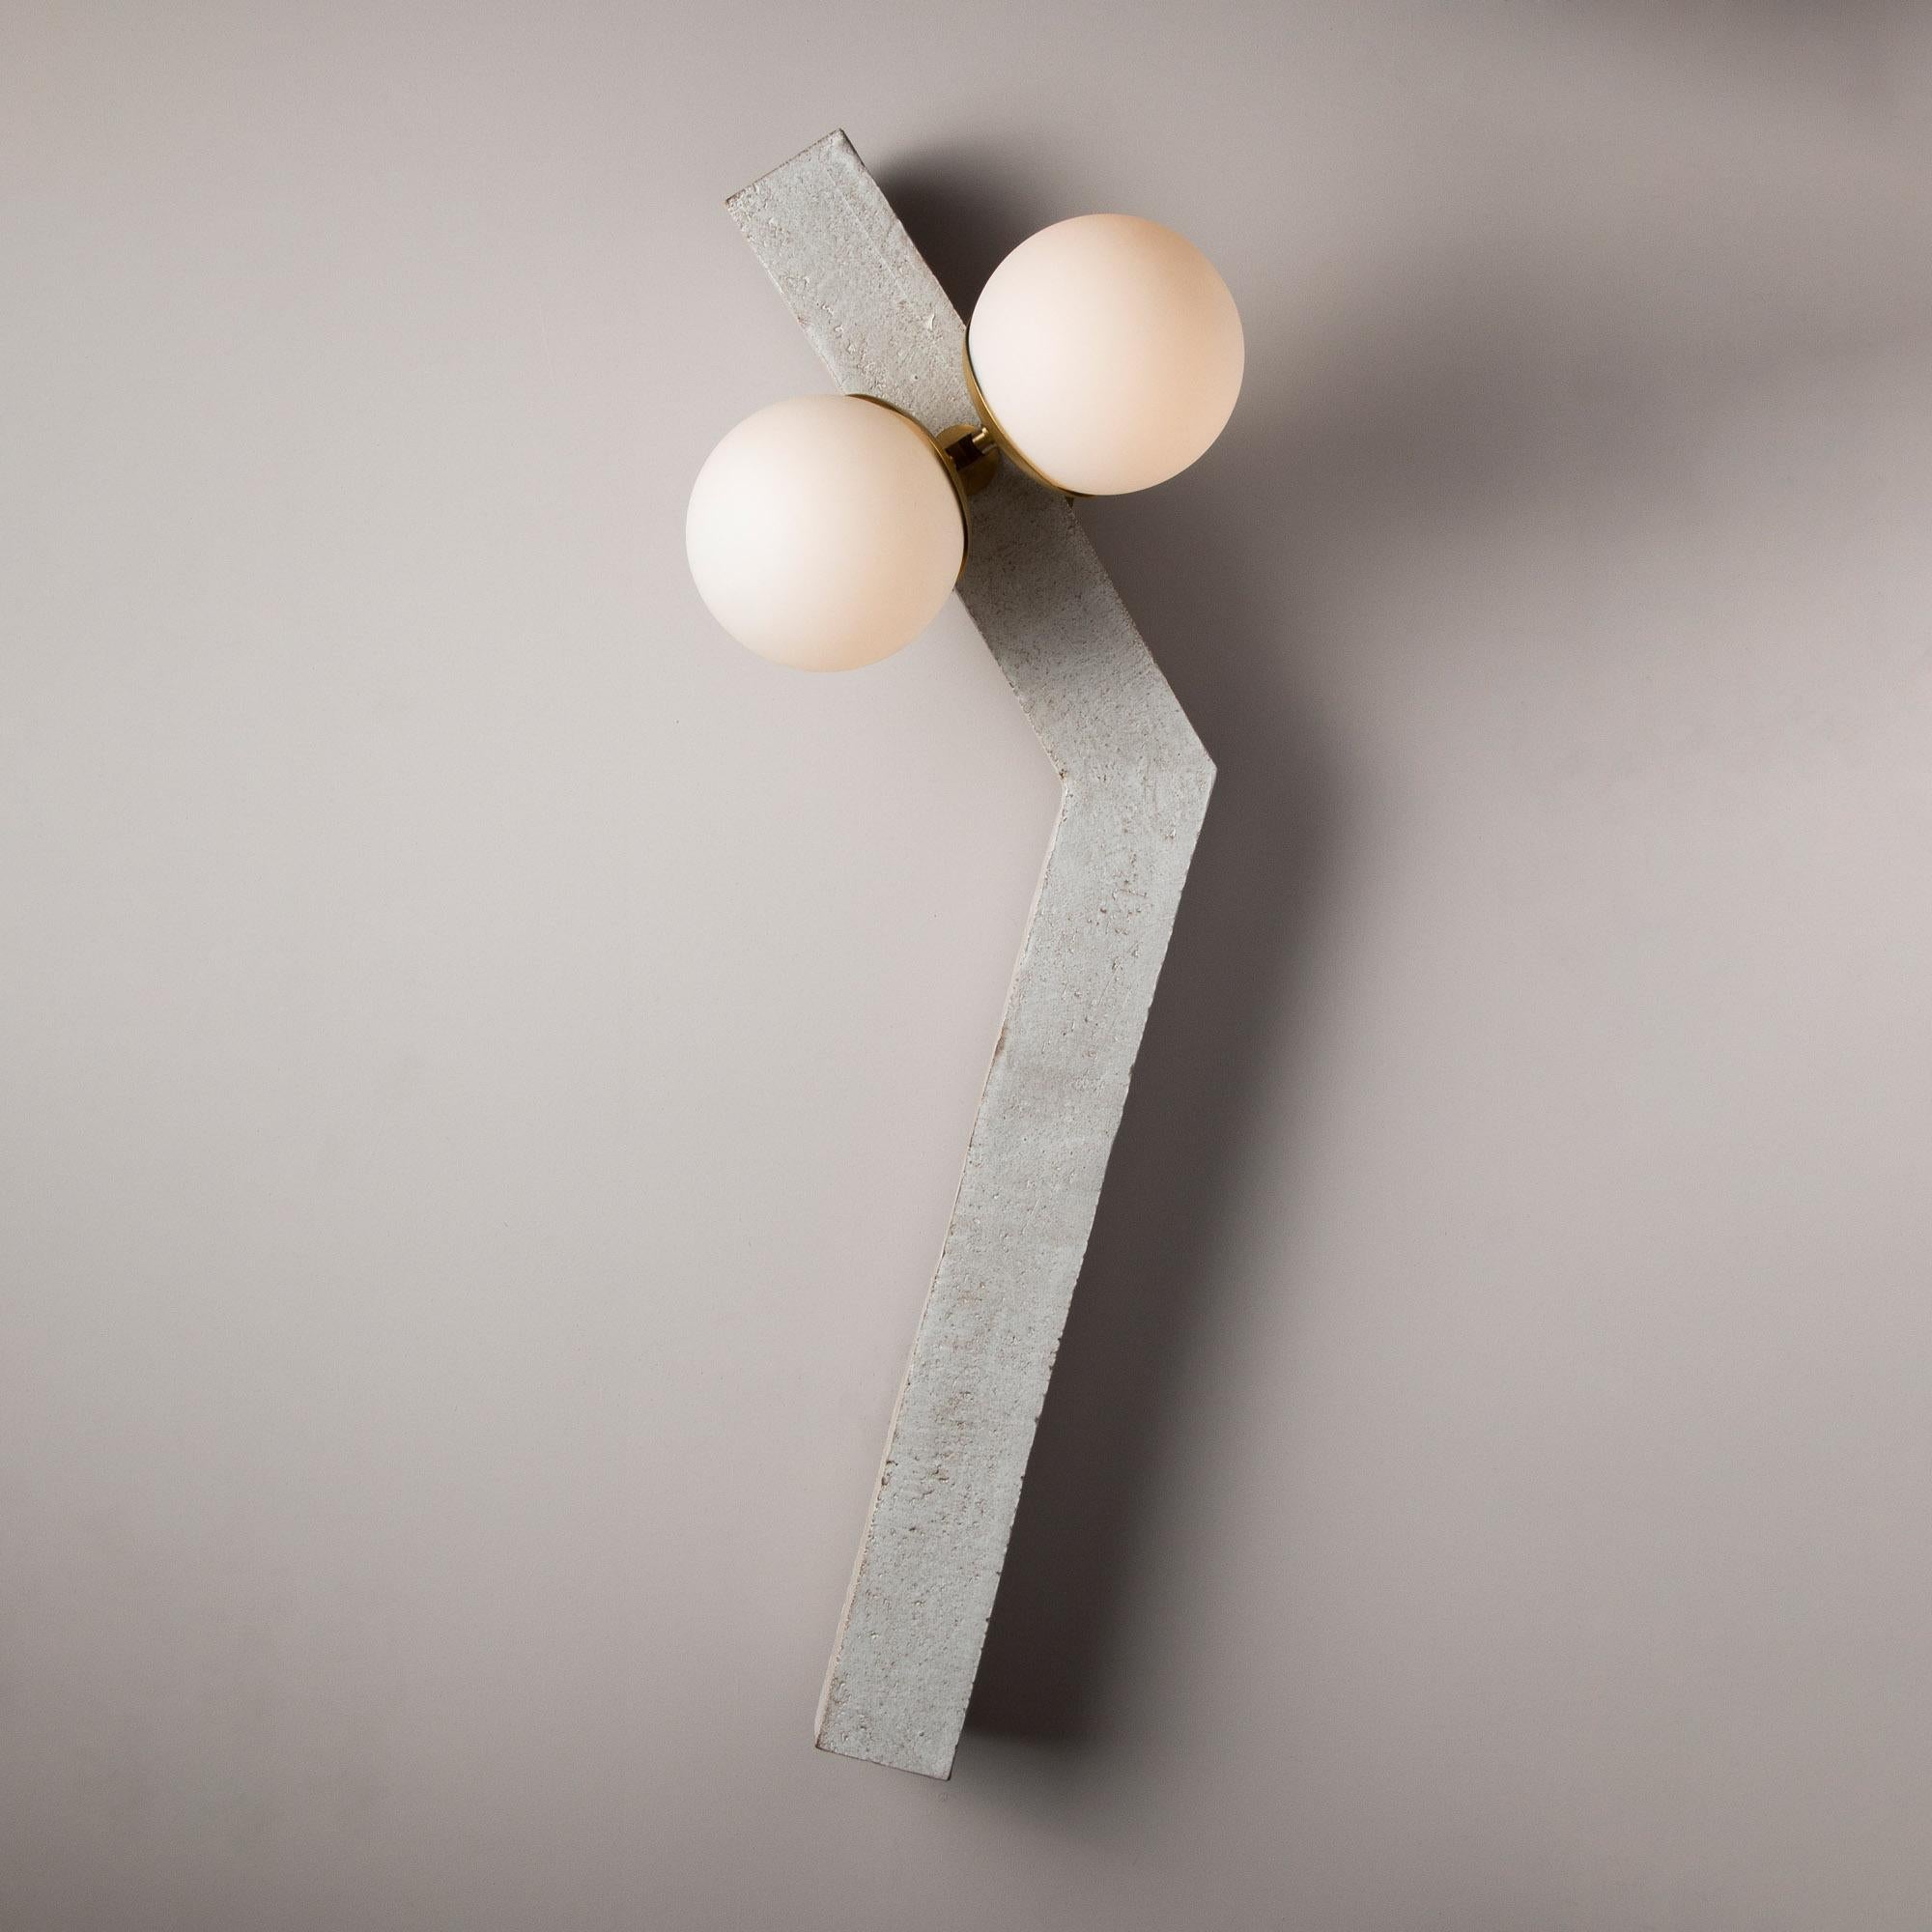 Inspired by midcentury Brutalist architecture and building materials, this playful handmade sconce balances a strong substantial ceramic base with delicate brass hardware and matte white glass. The angled ceramic center column is handcrafted from a